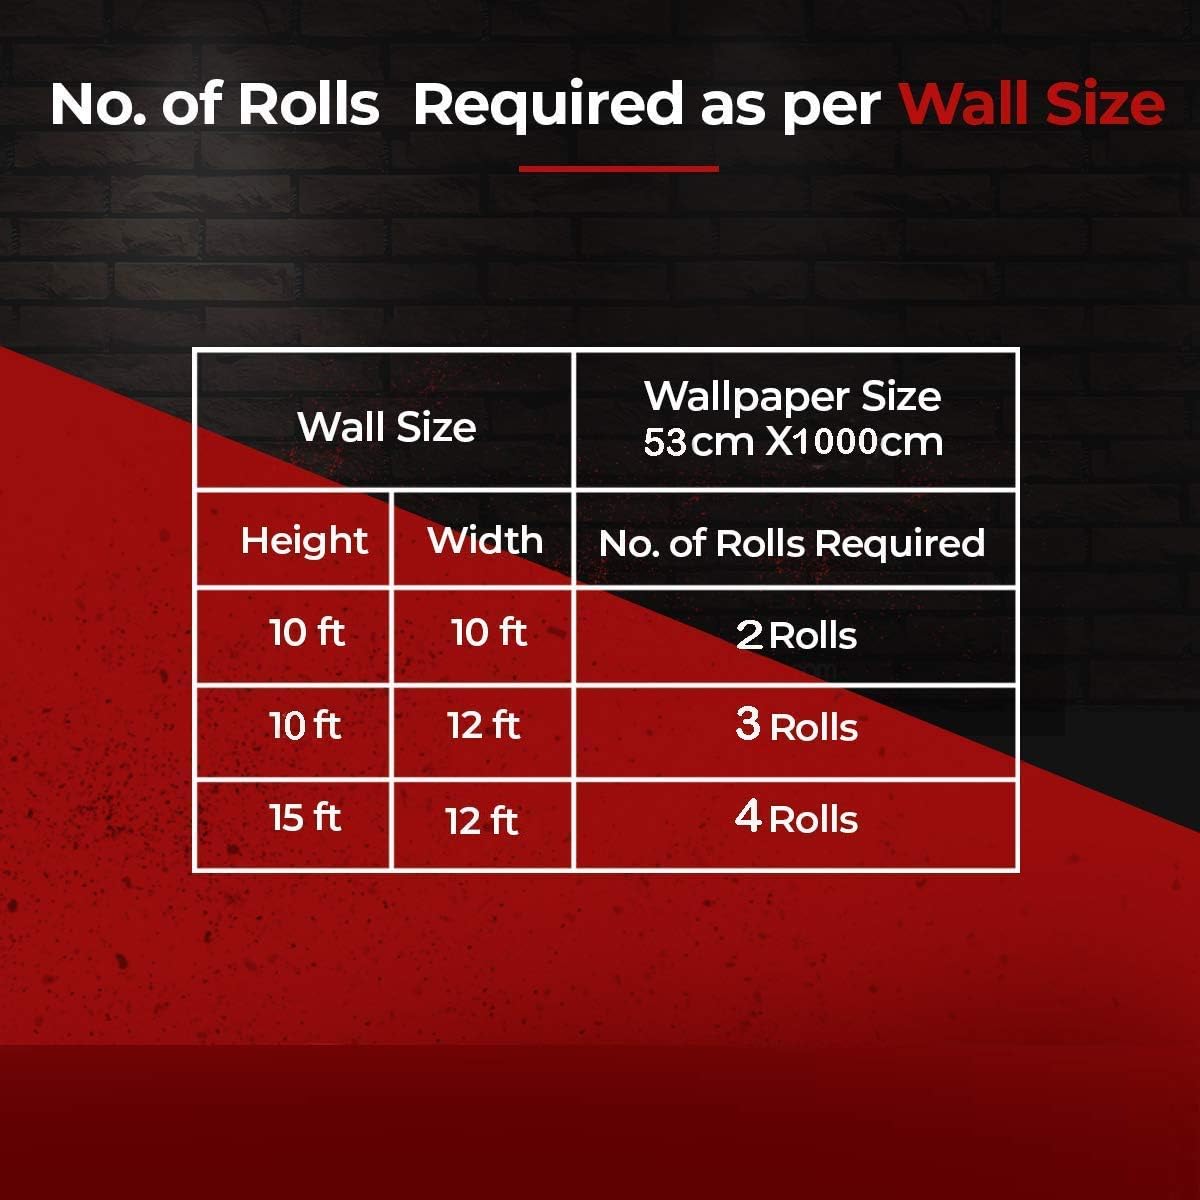 3D Latest Brick Design Red Wallpaper Roll for Home Walls 57 Sq Ft (0.53 m or 33 Feet)